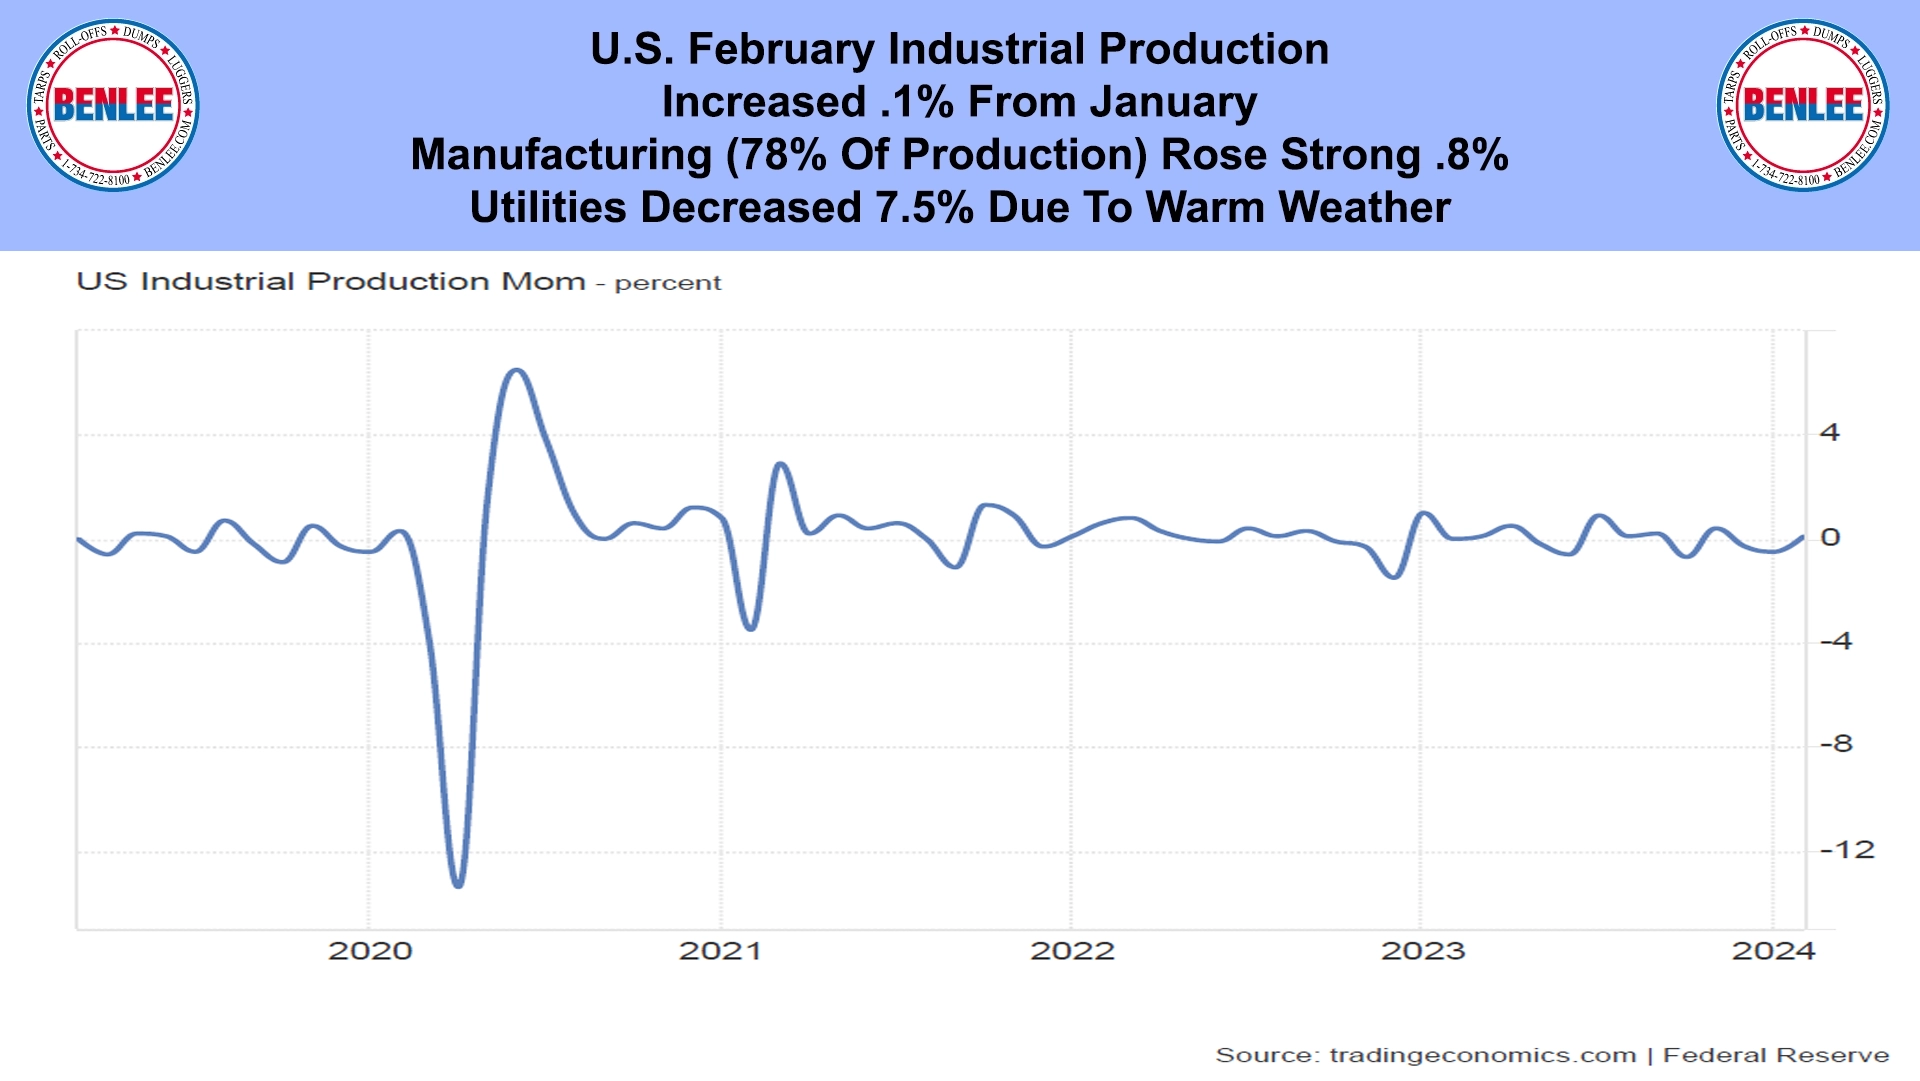 U.S. February Industrial Production